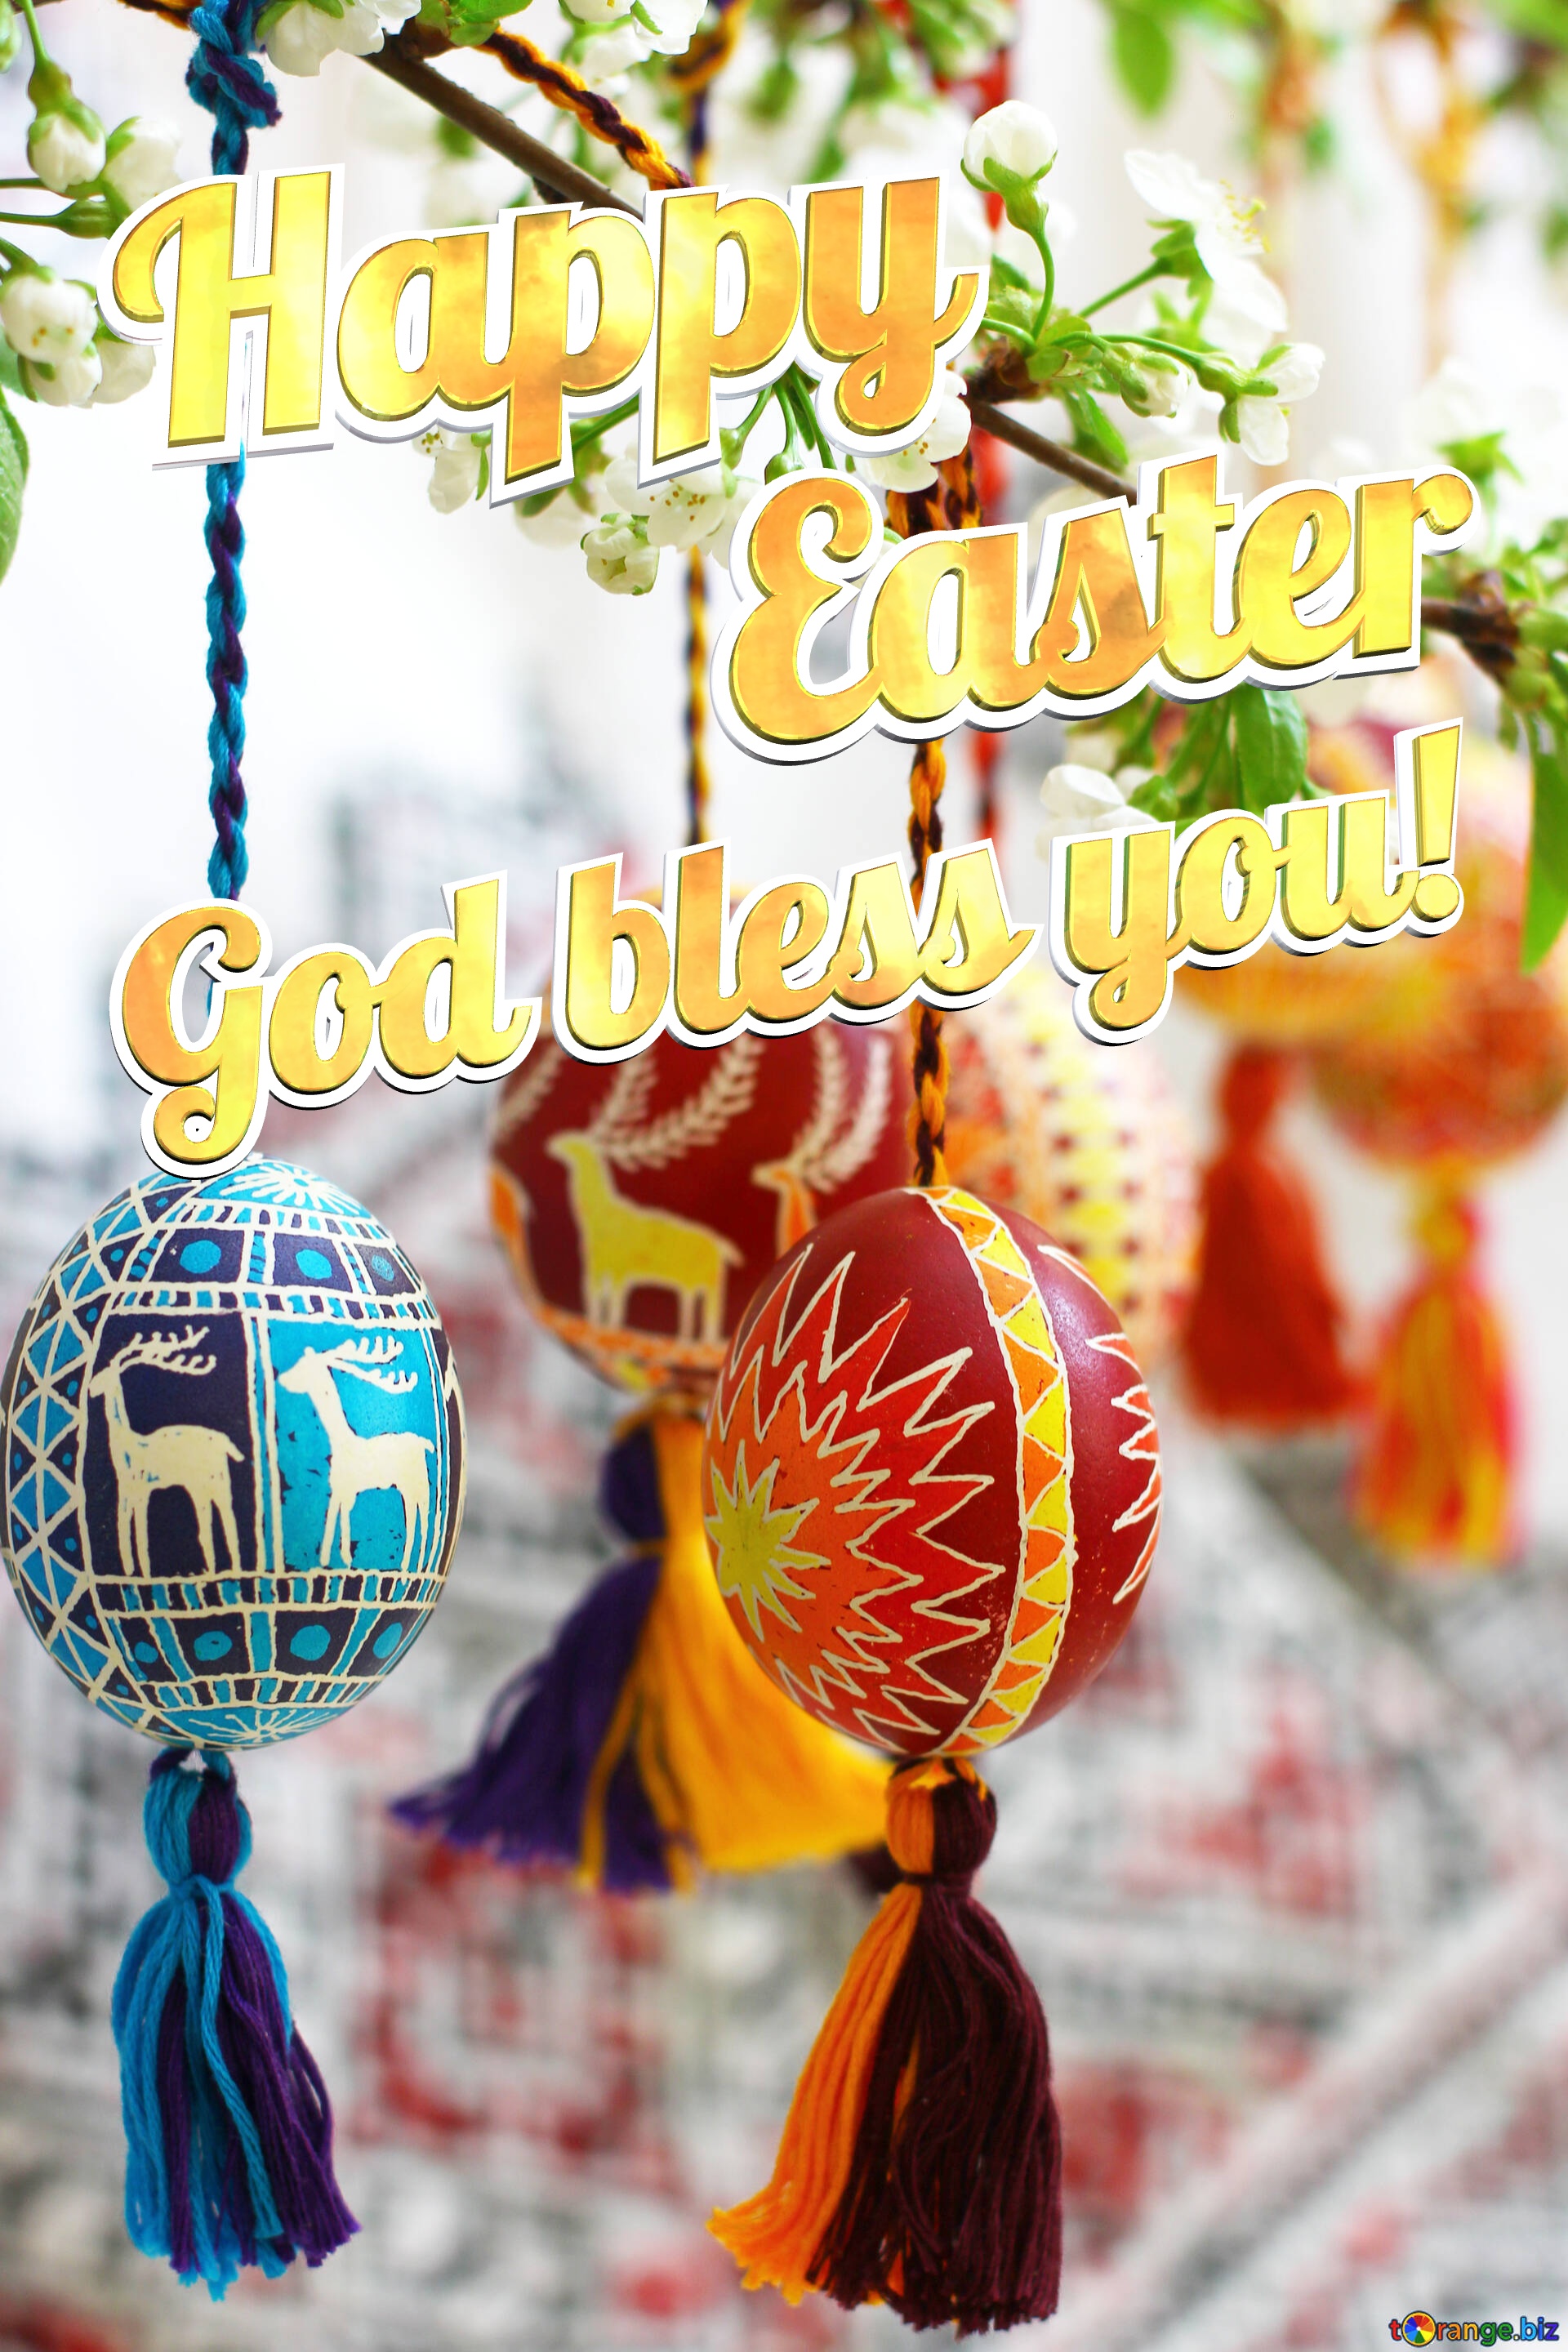 Happy Easter Wishes God bless you! Easter eggs hanging on tree №30223